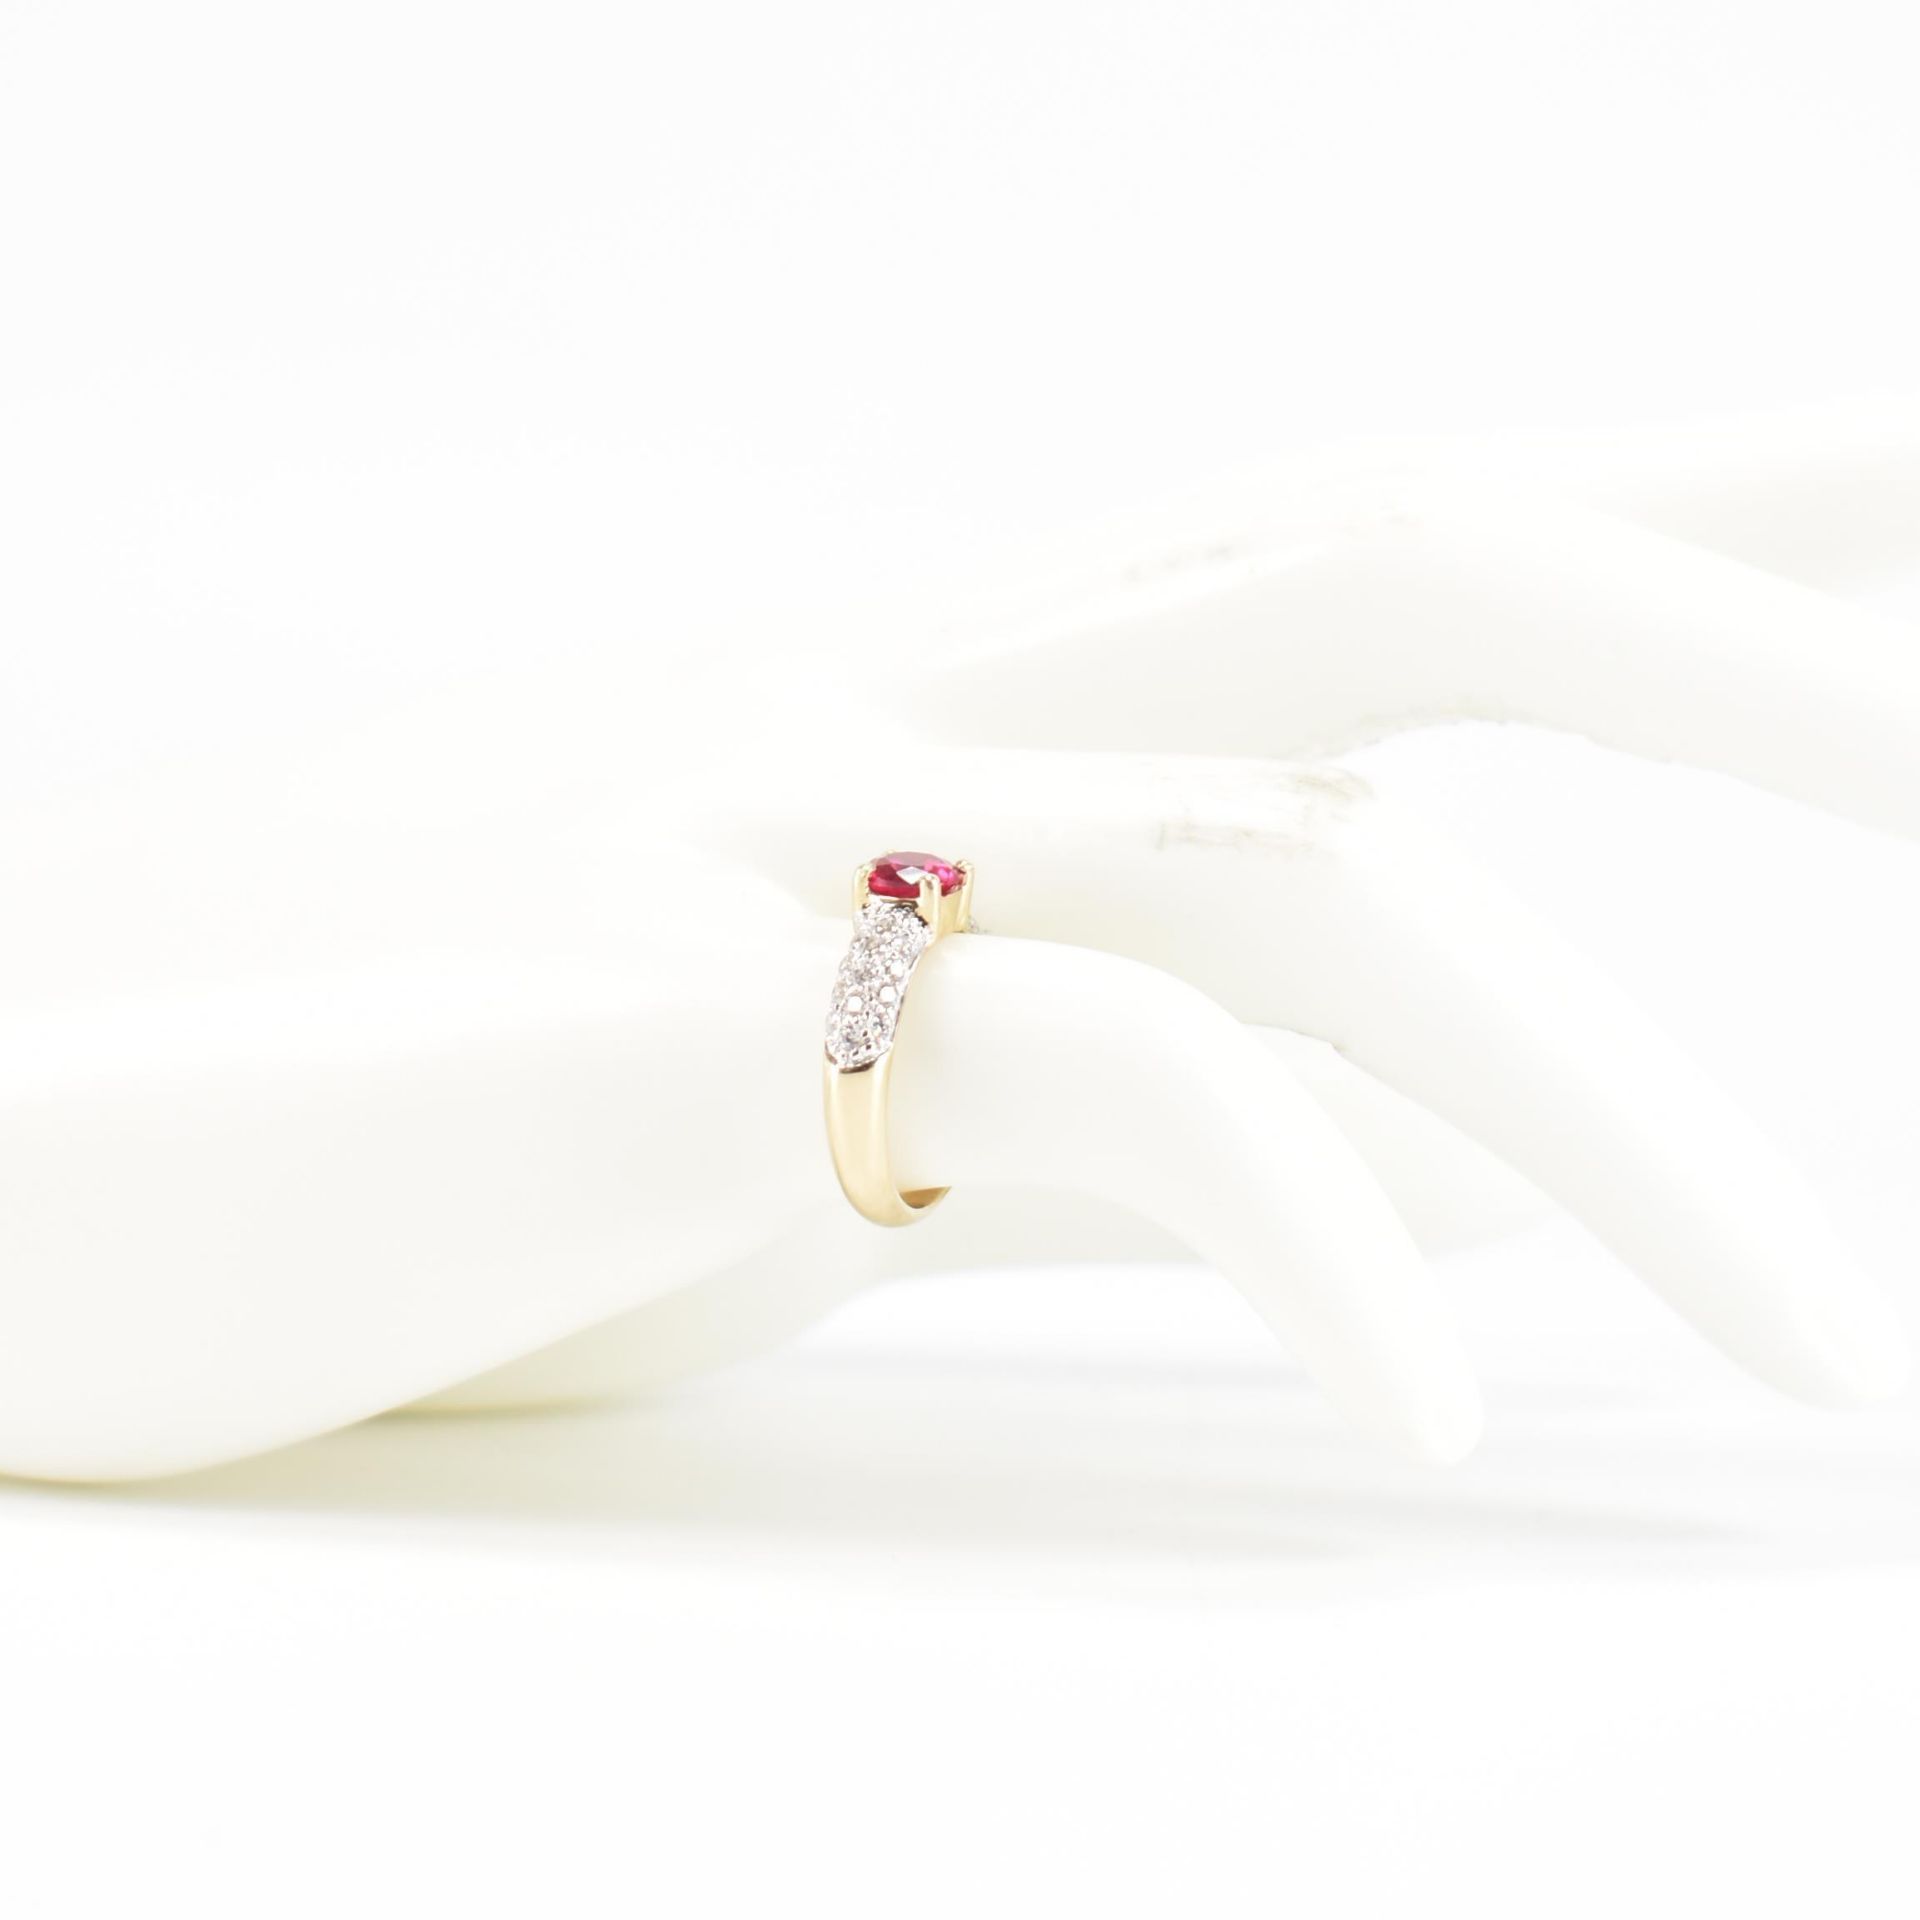 HALLMARKED 9CT GOLD SYNTHETIC RUBY & CZ RING - Image 7 of 7